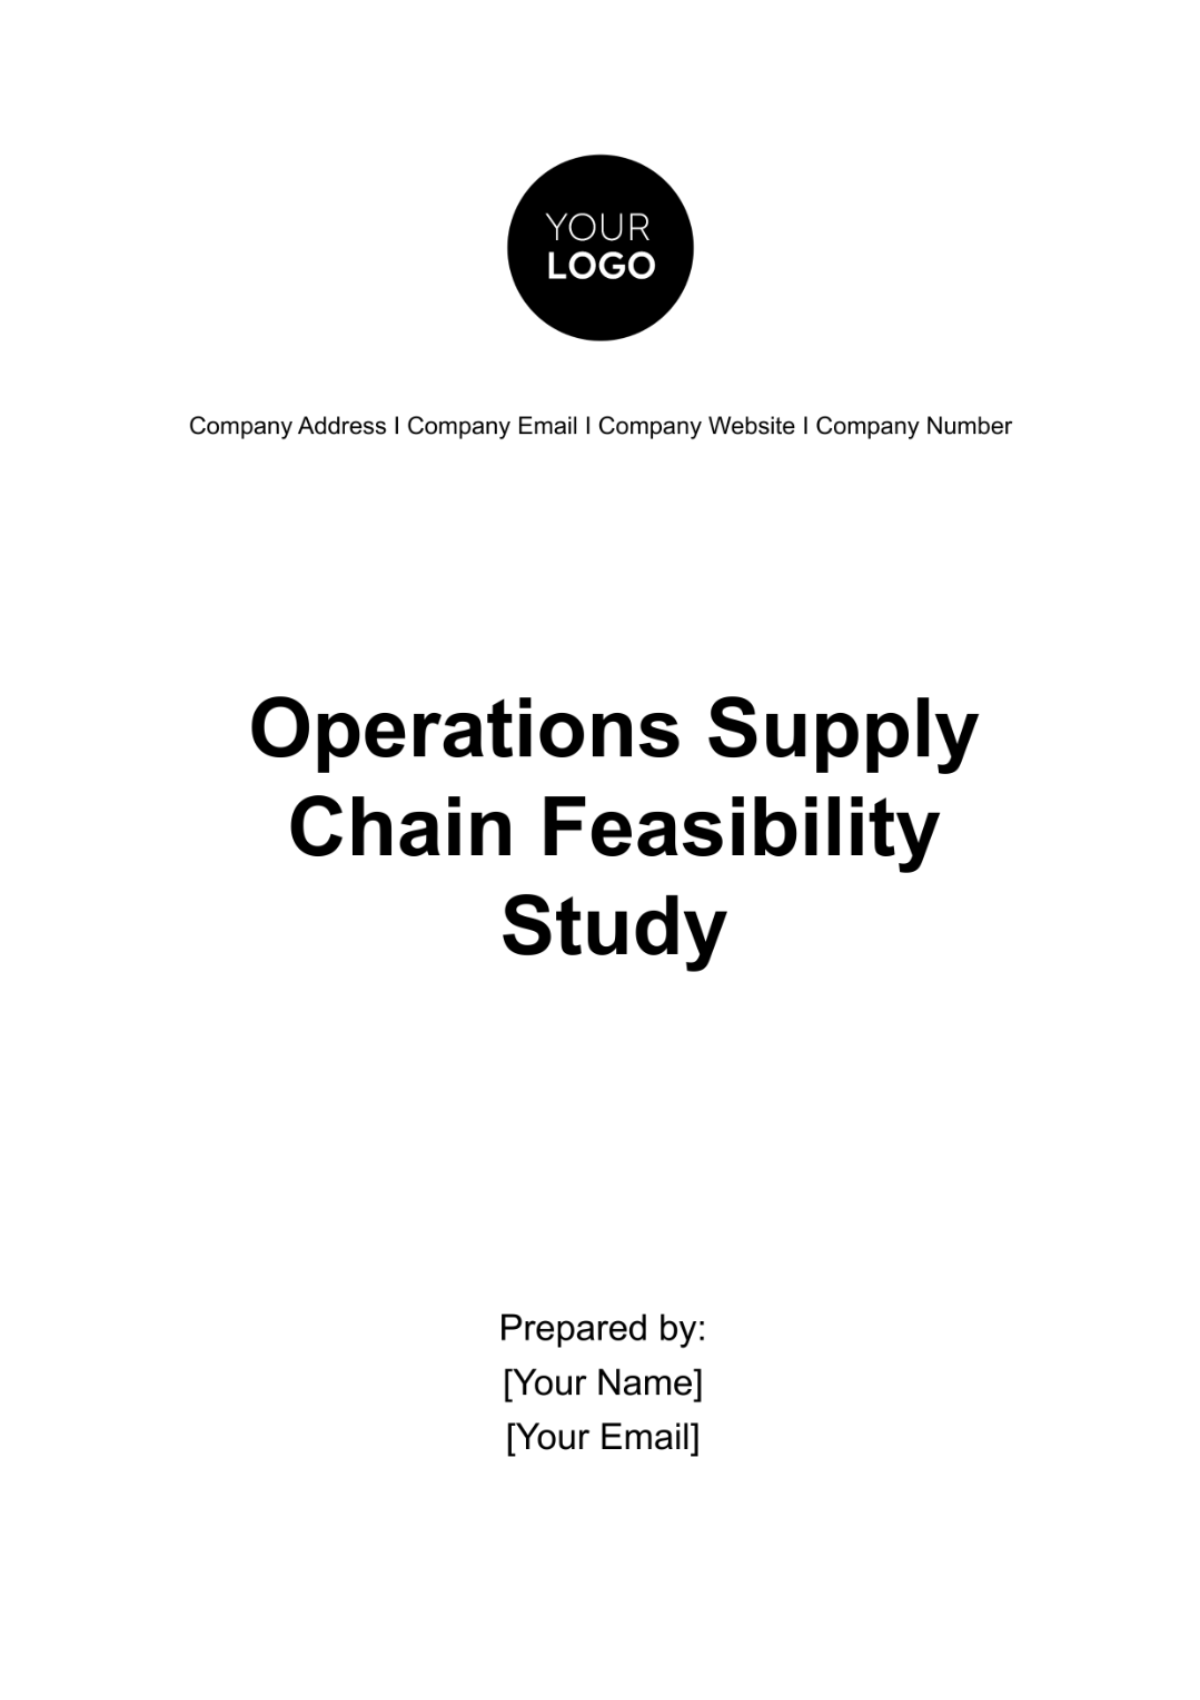 Operations Supply Chain Feasibility Study Template